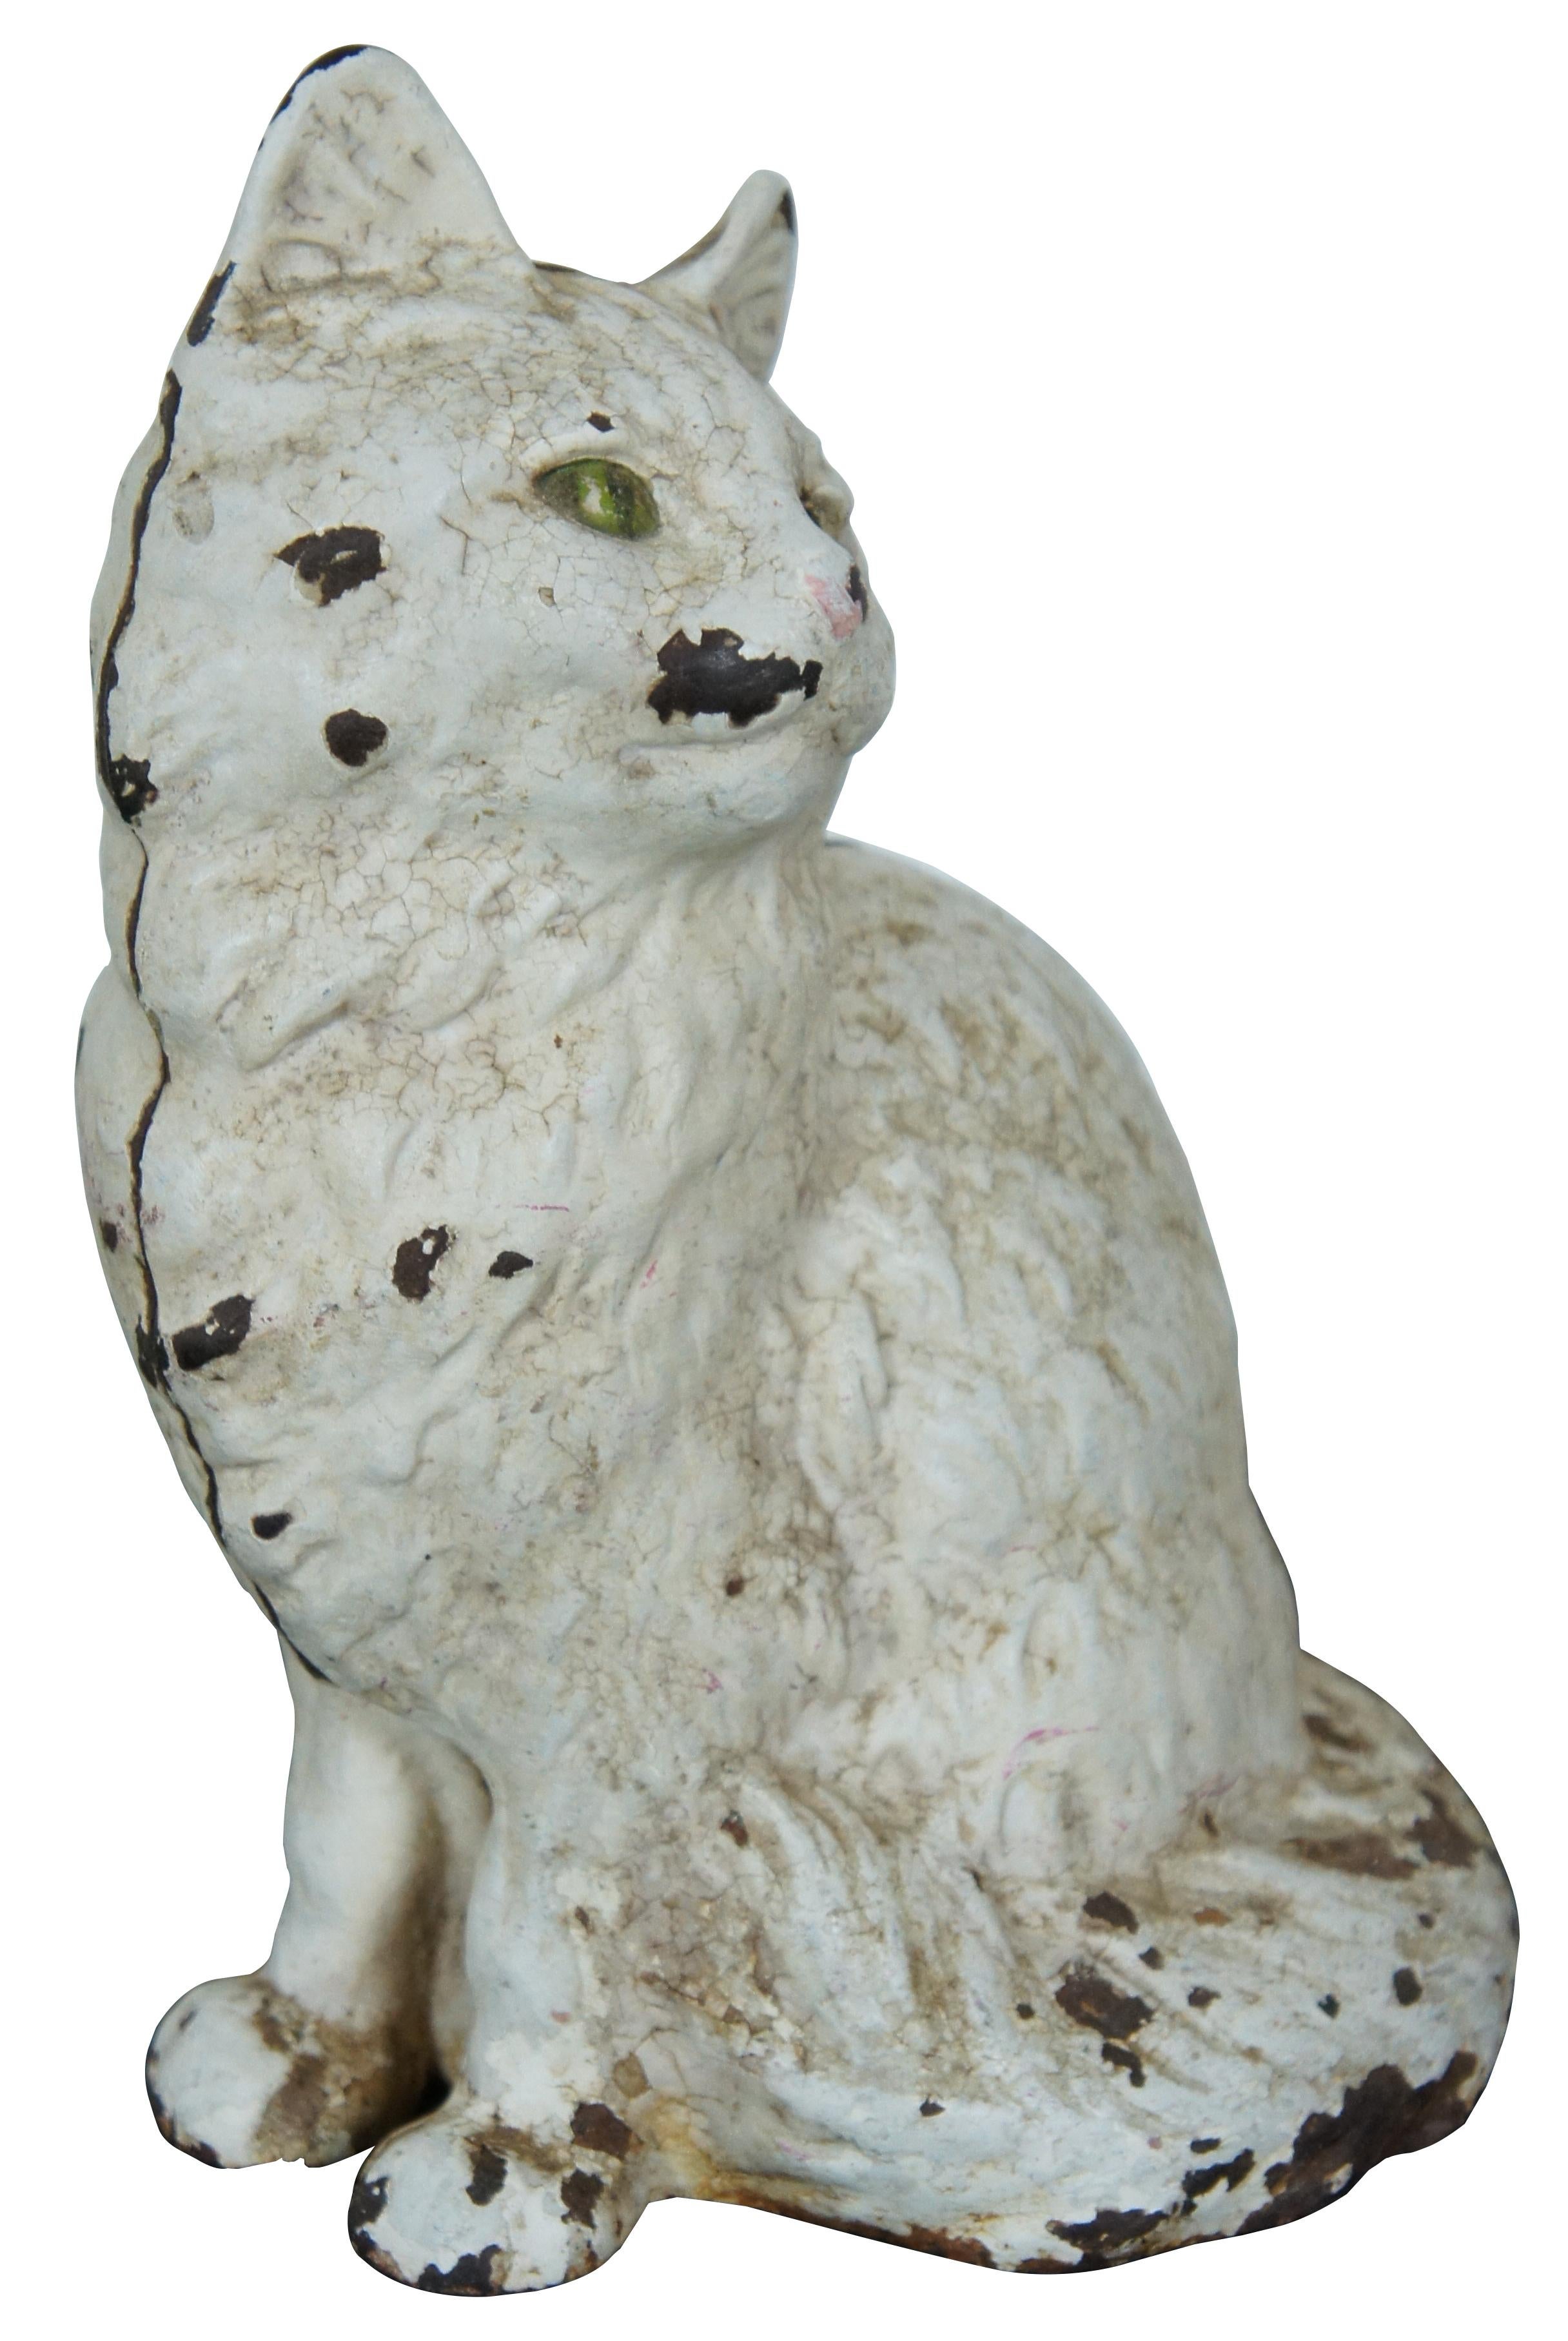 Antique cast iron doorstop in the shape of a seated, white, Persian cat with green eyes. Attributed to Hubley. #802. Measure: 9